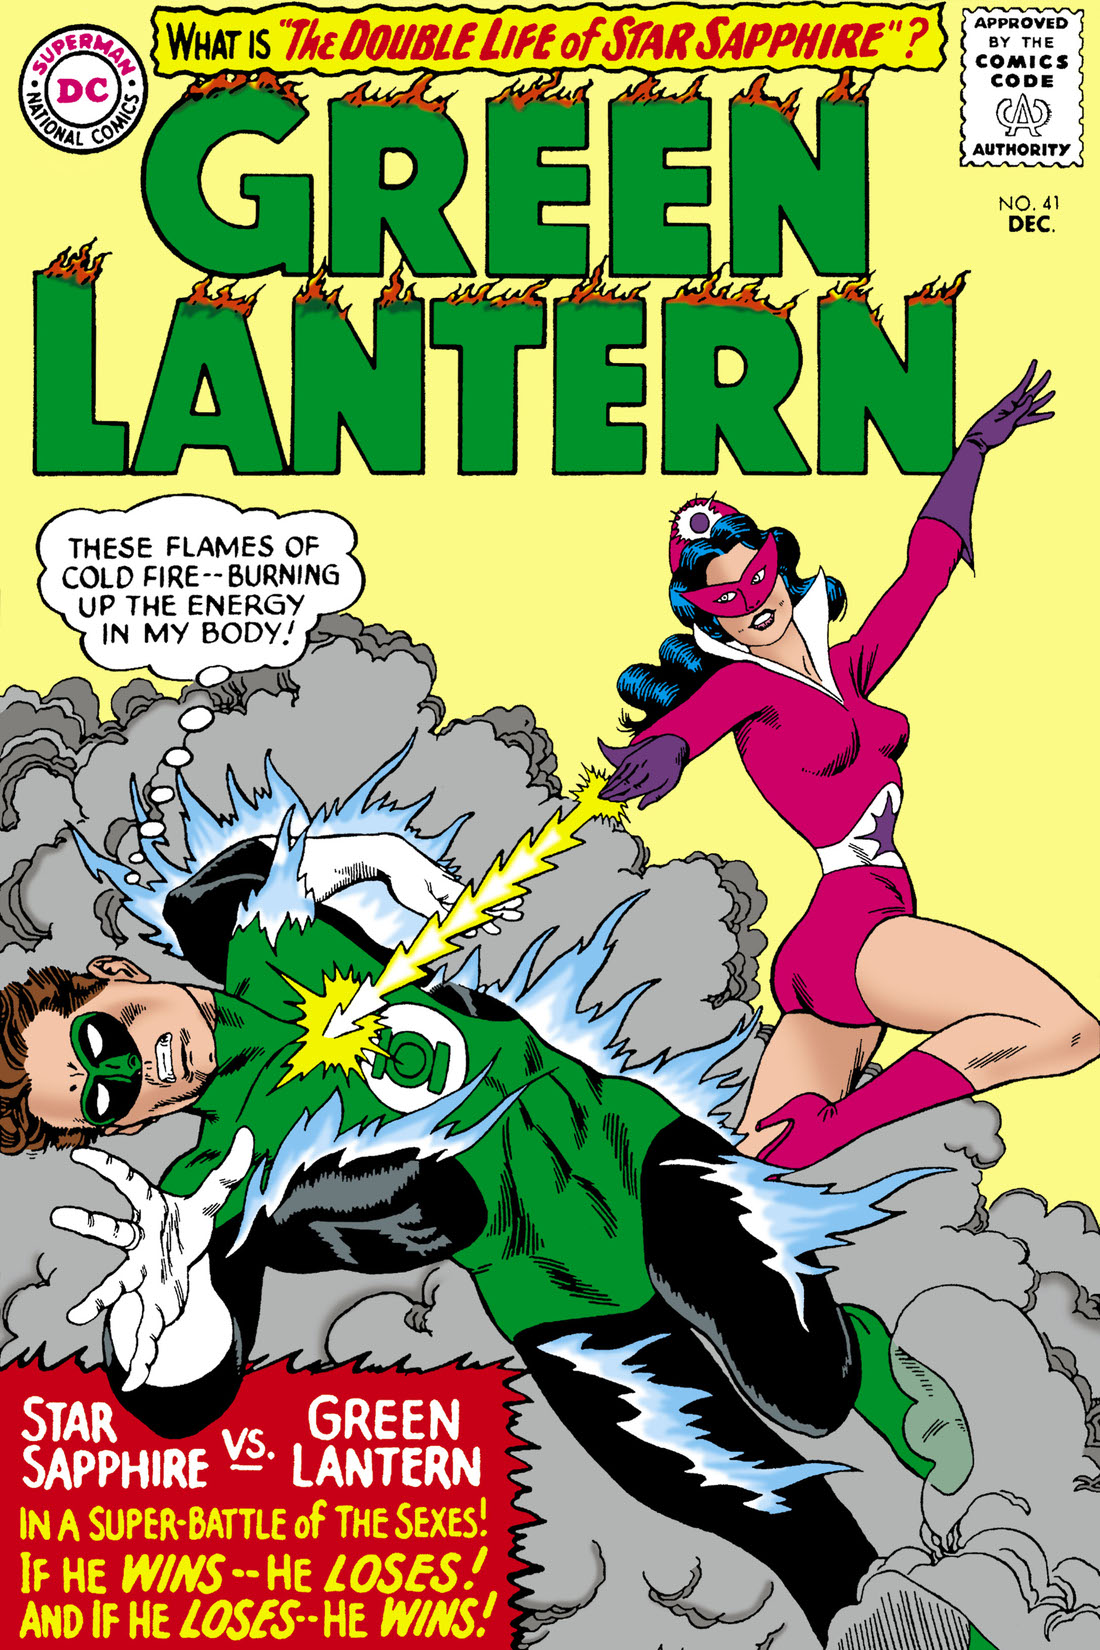 Green Lantern (1960-) #41 preview images